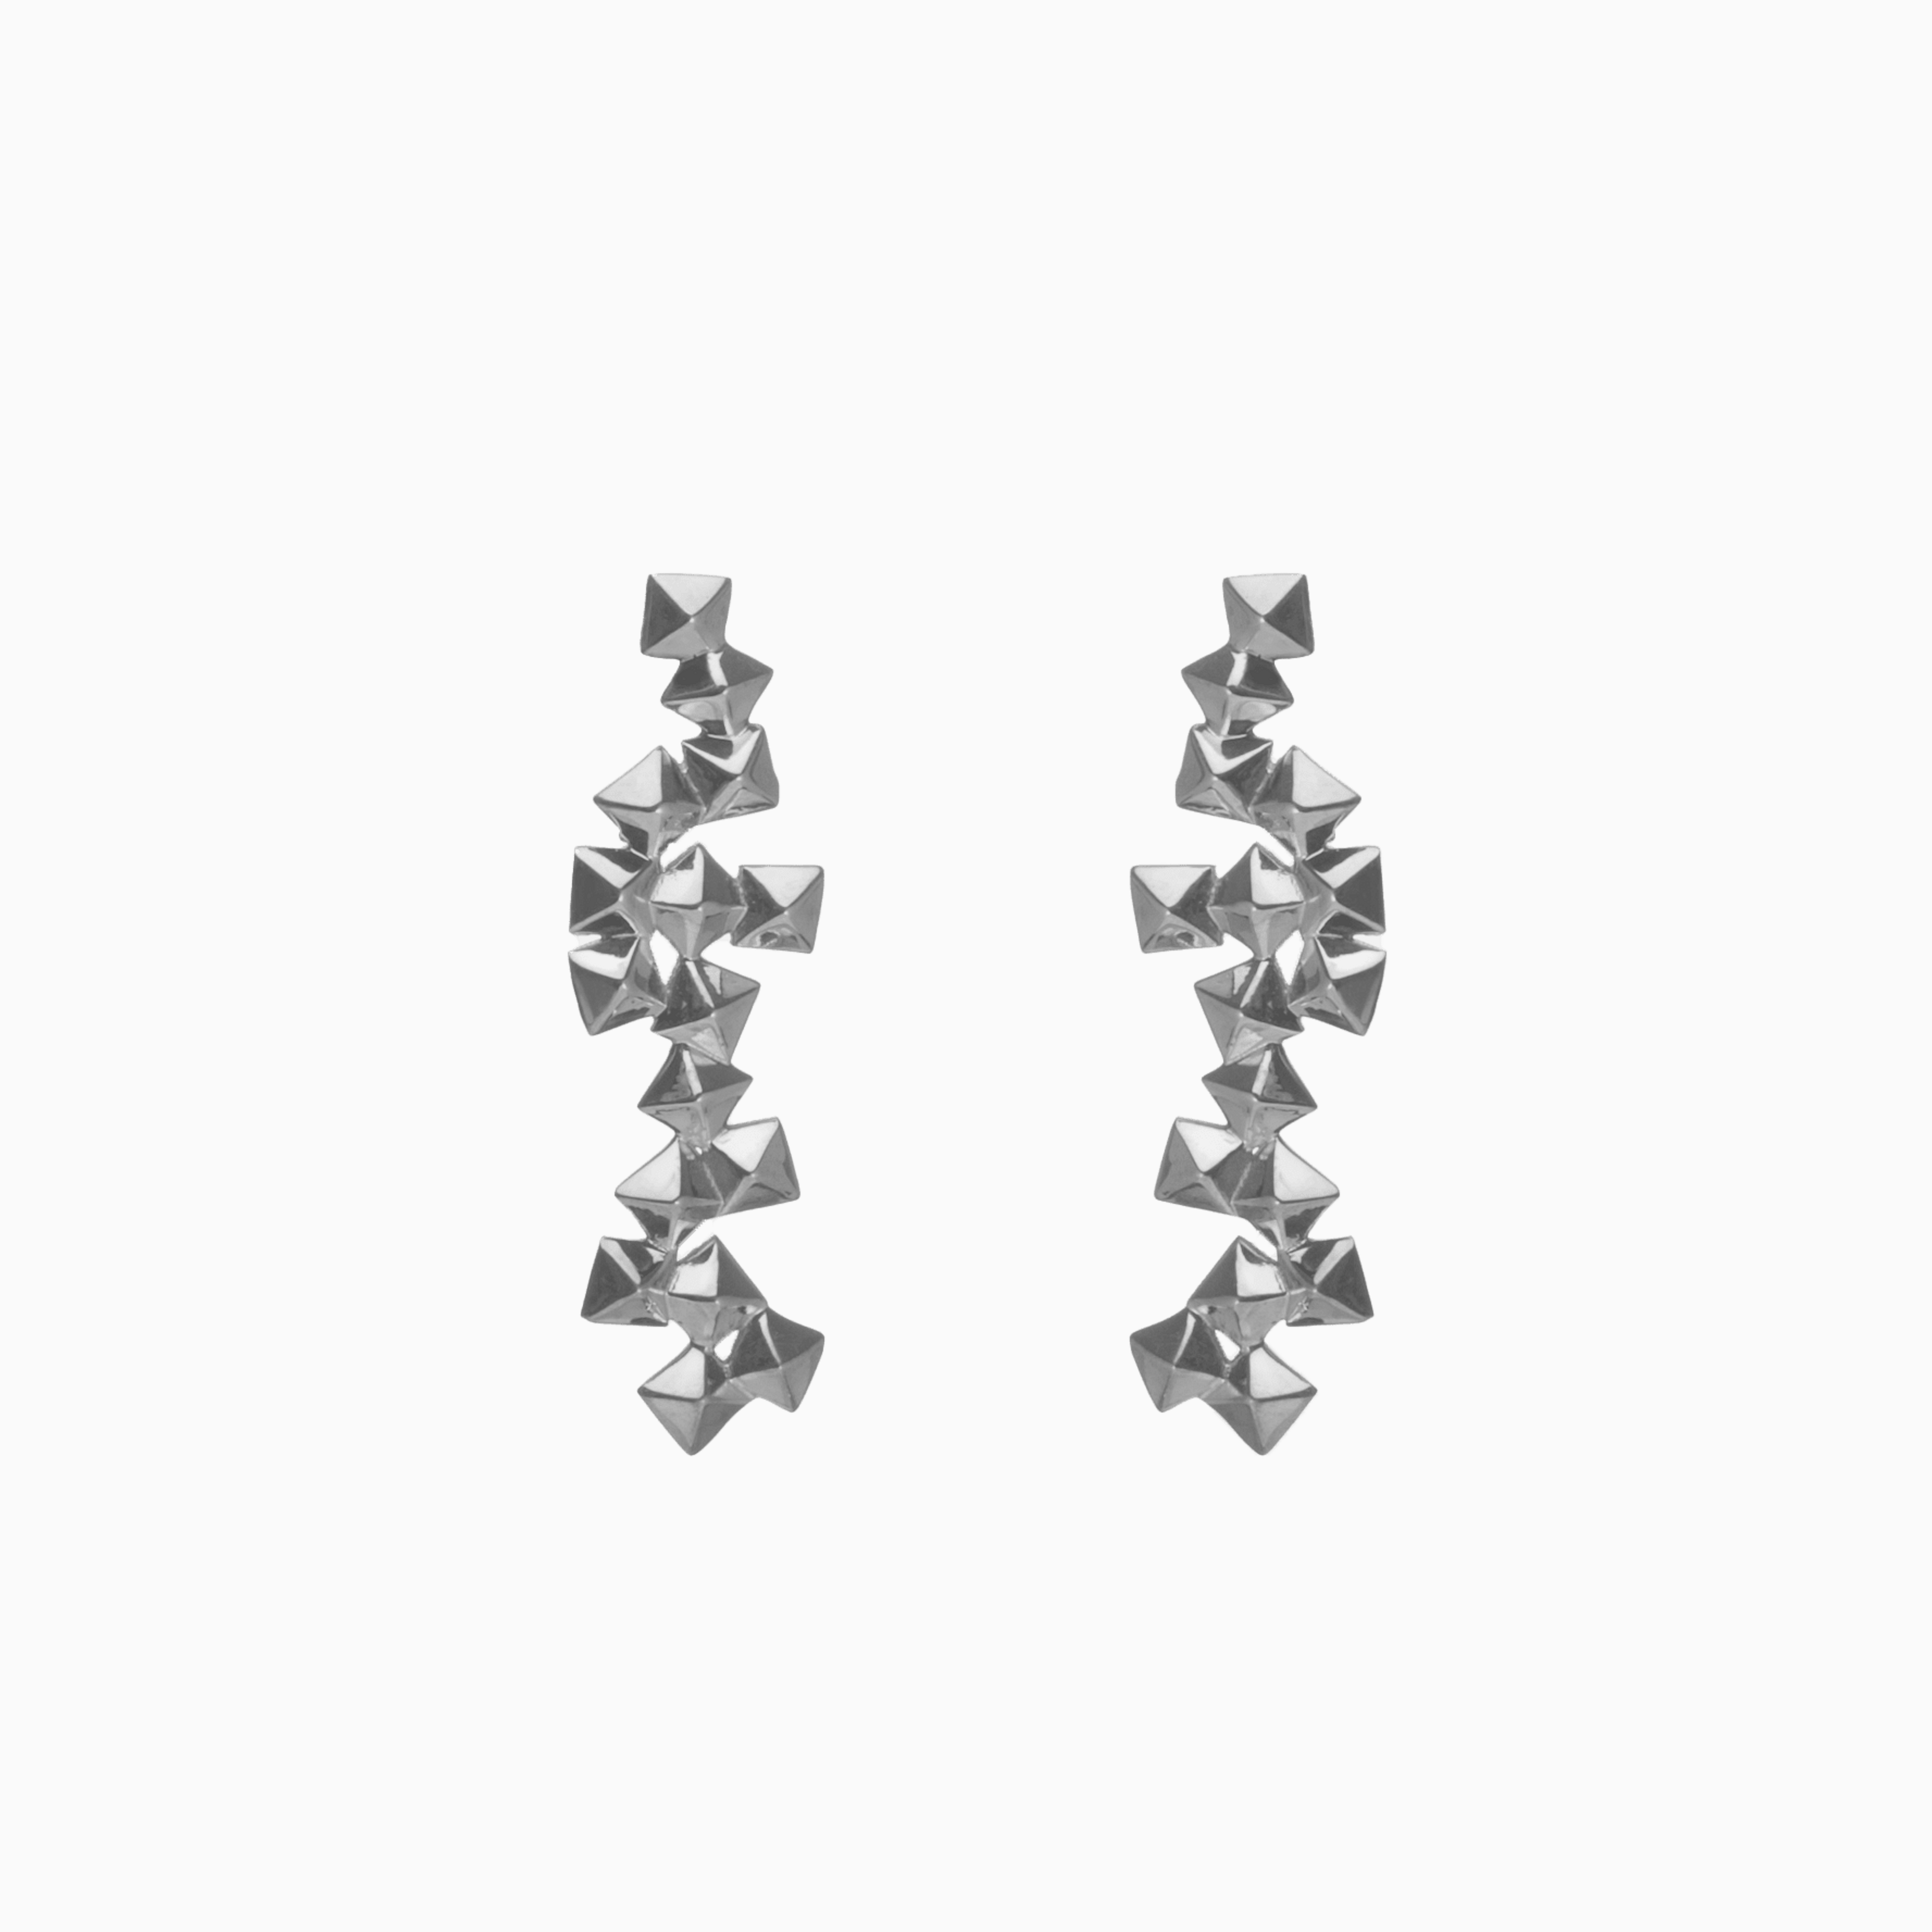 Structural Pyramid Earrings